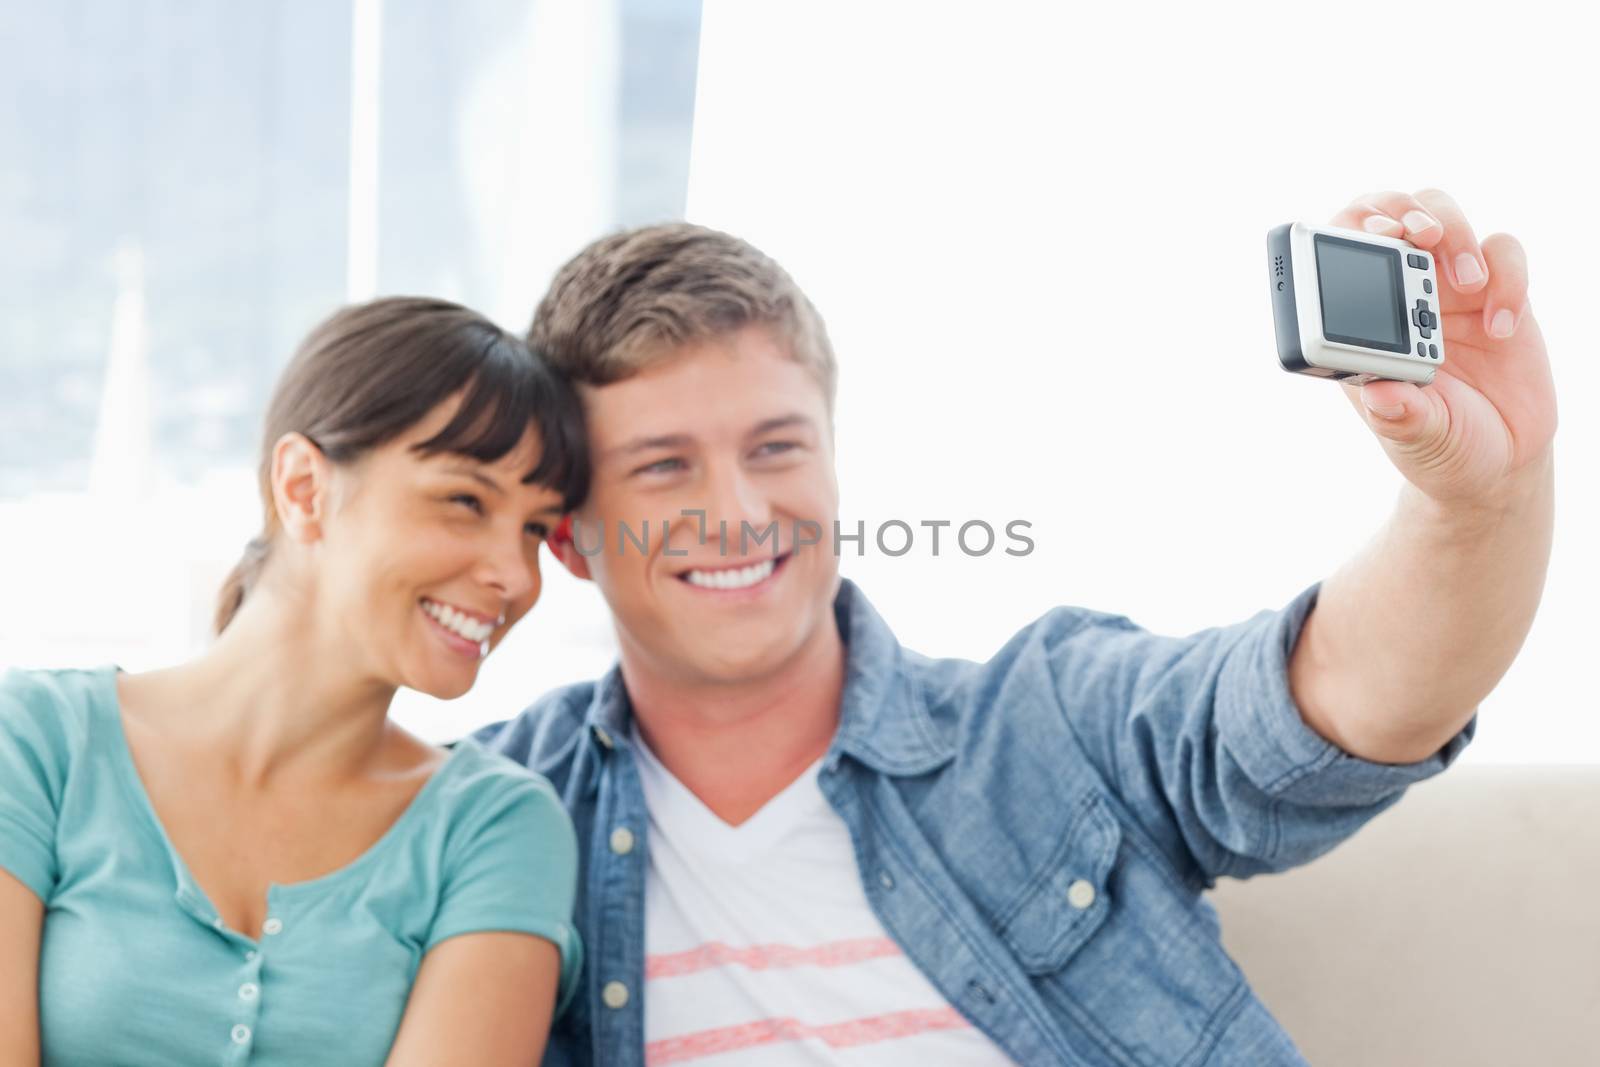 A couple pose for a photo together by smiling and pressing near each other.